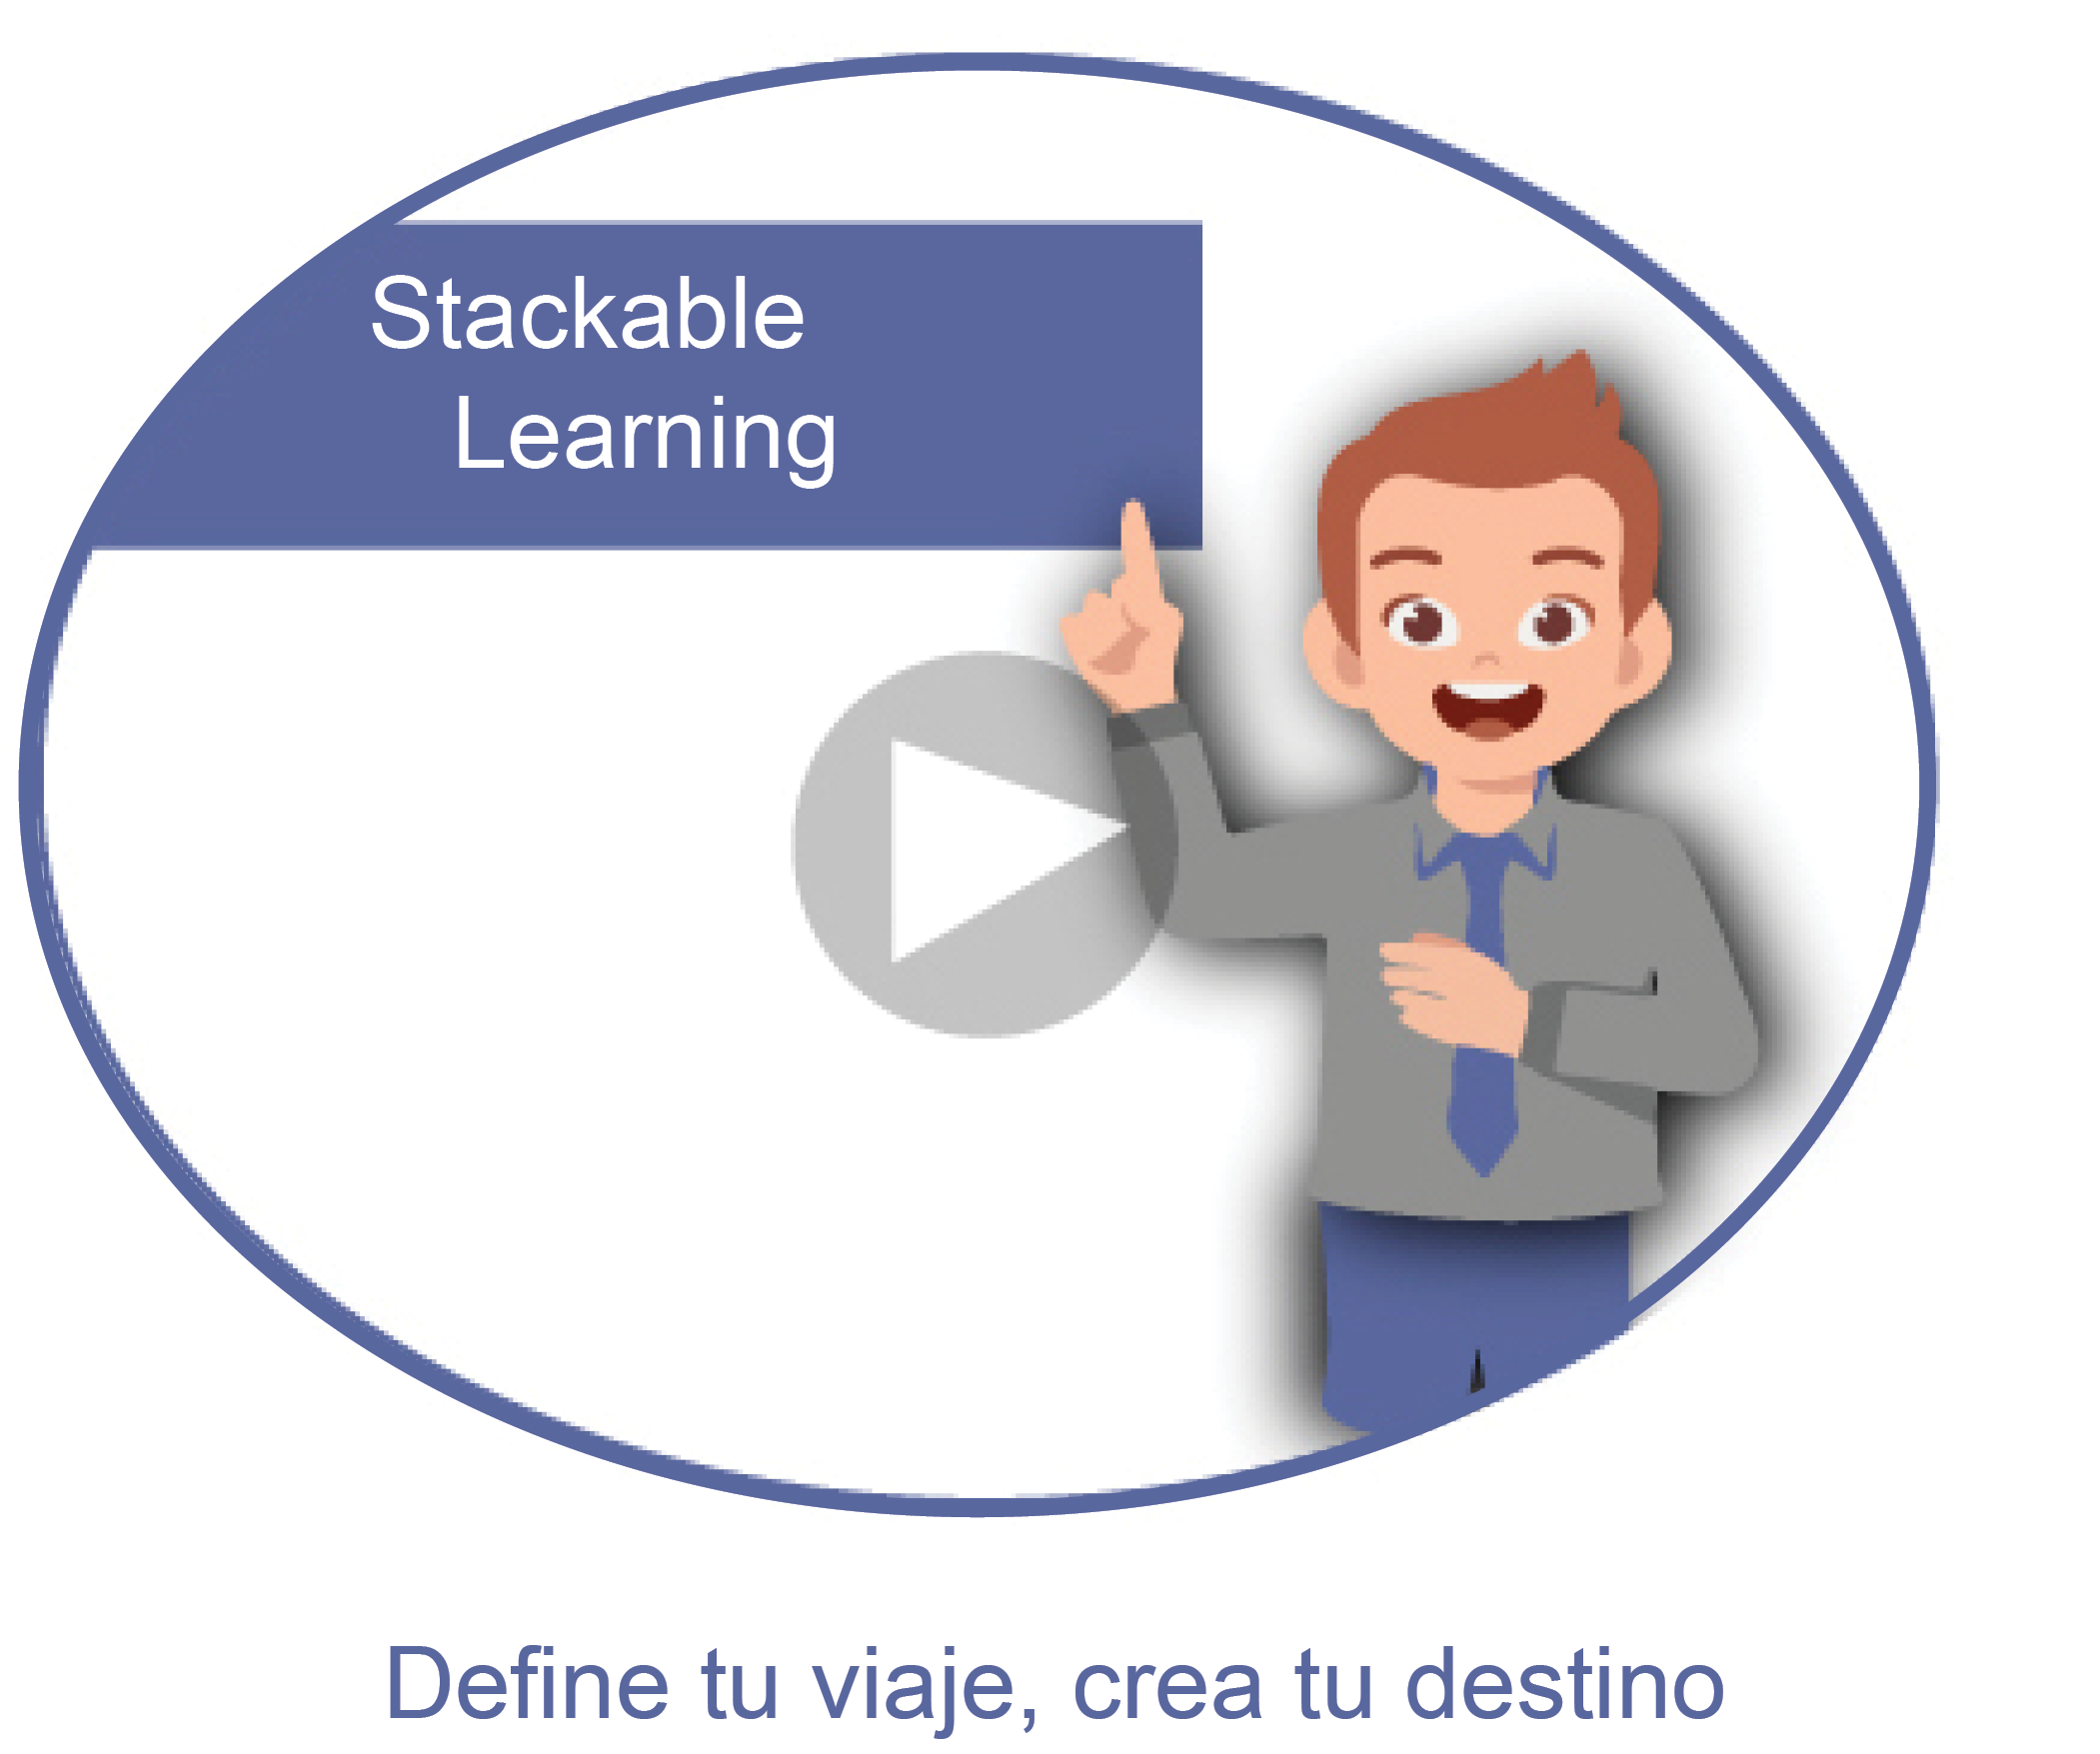 Stackable Learning